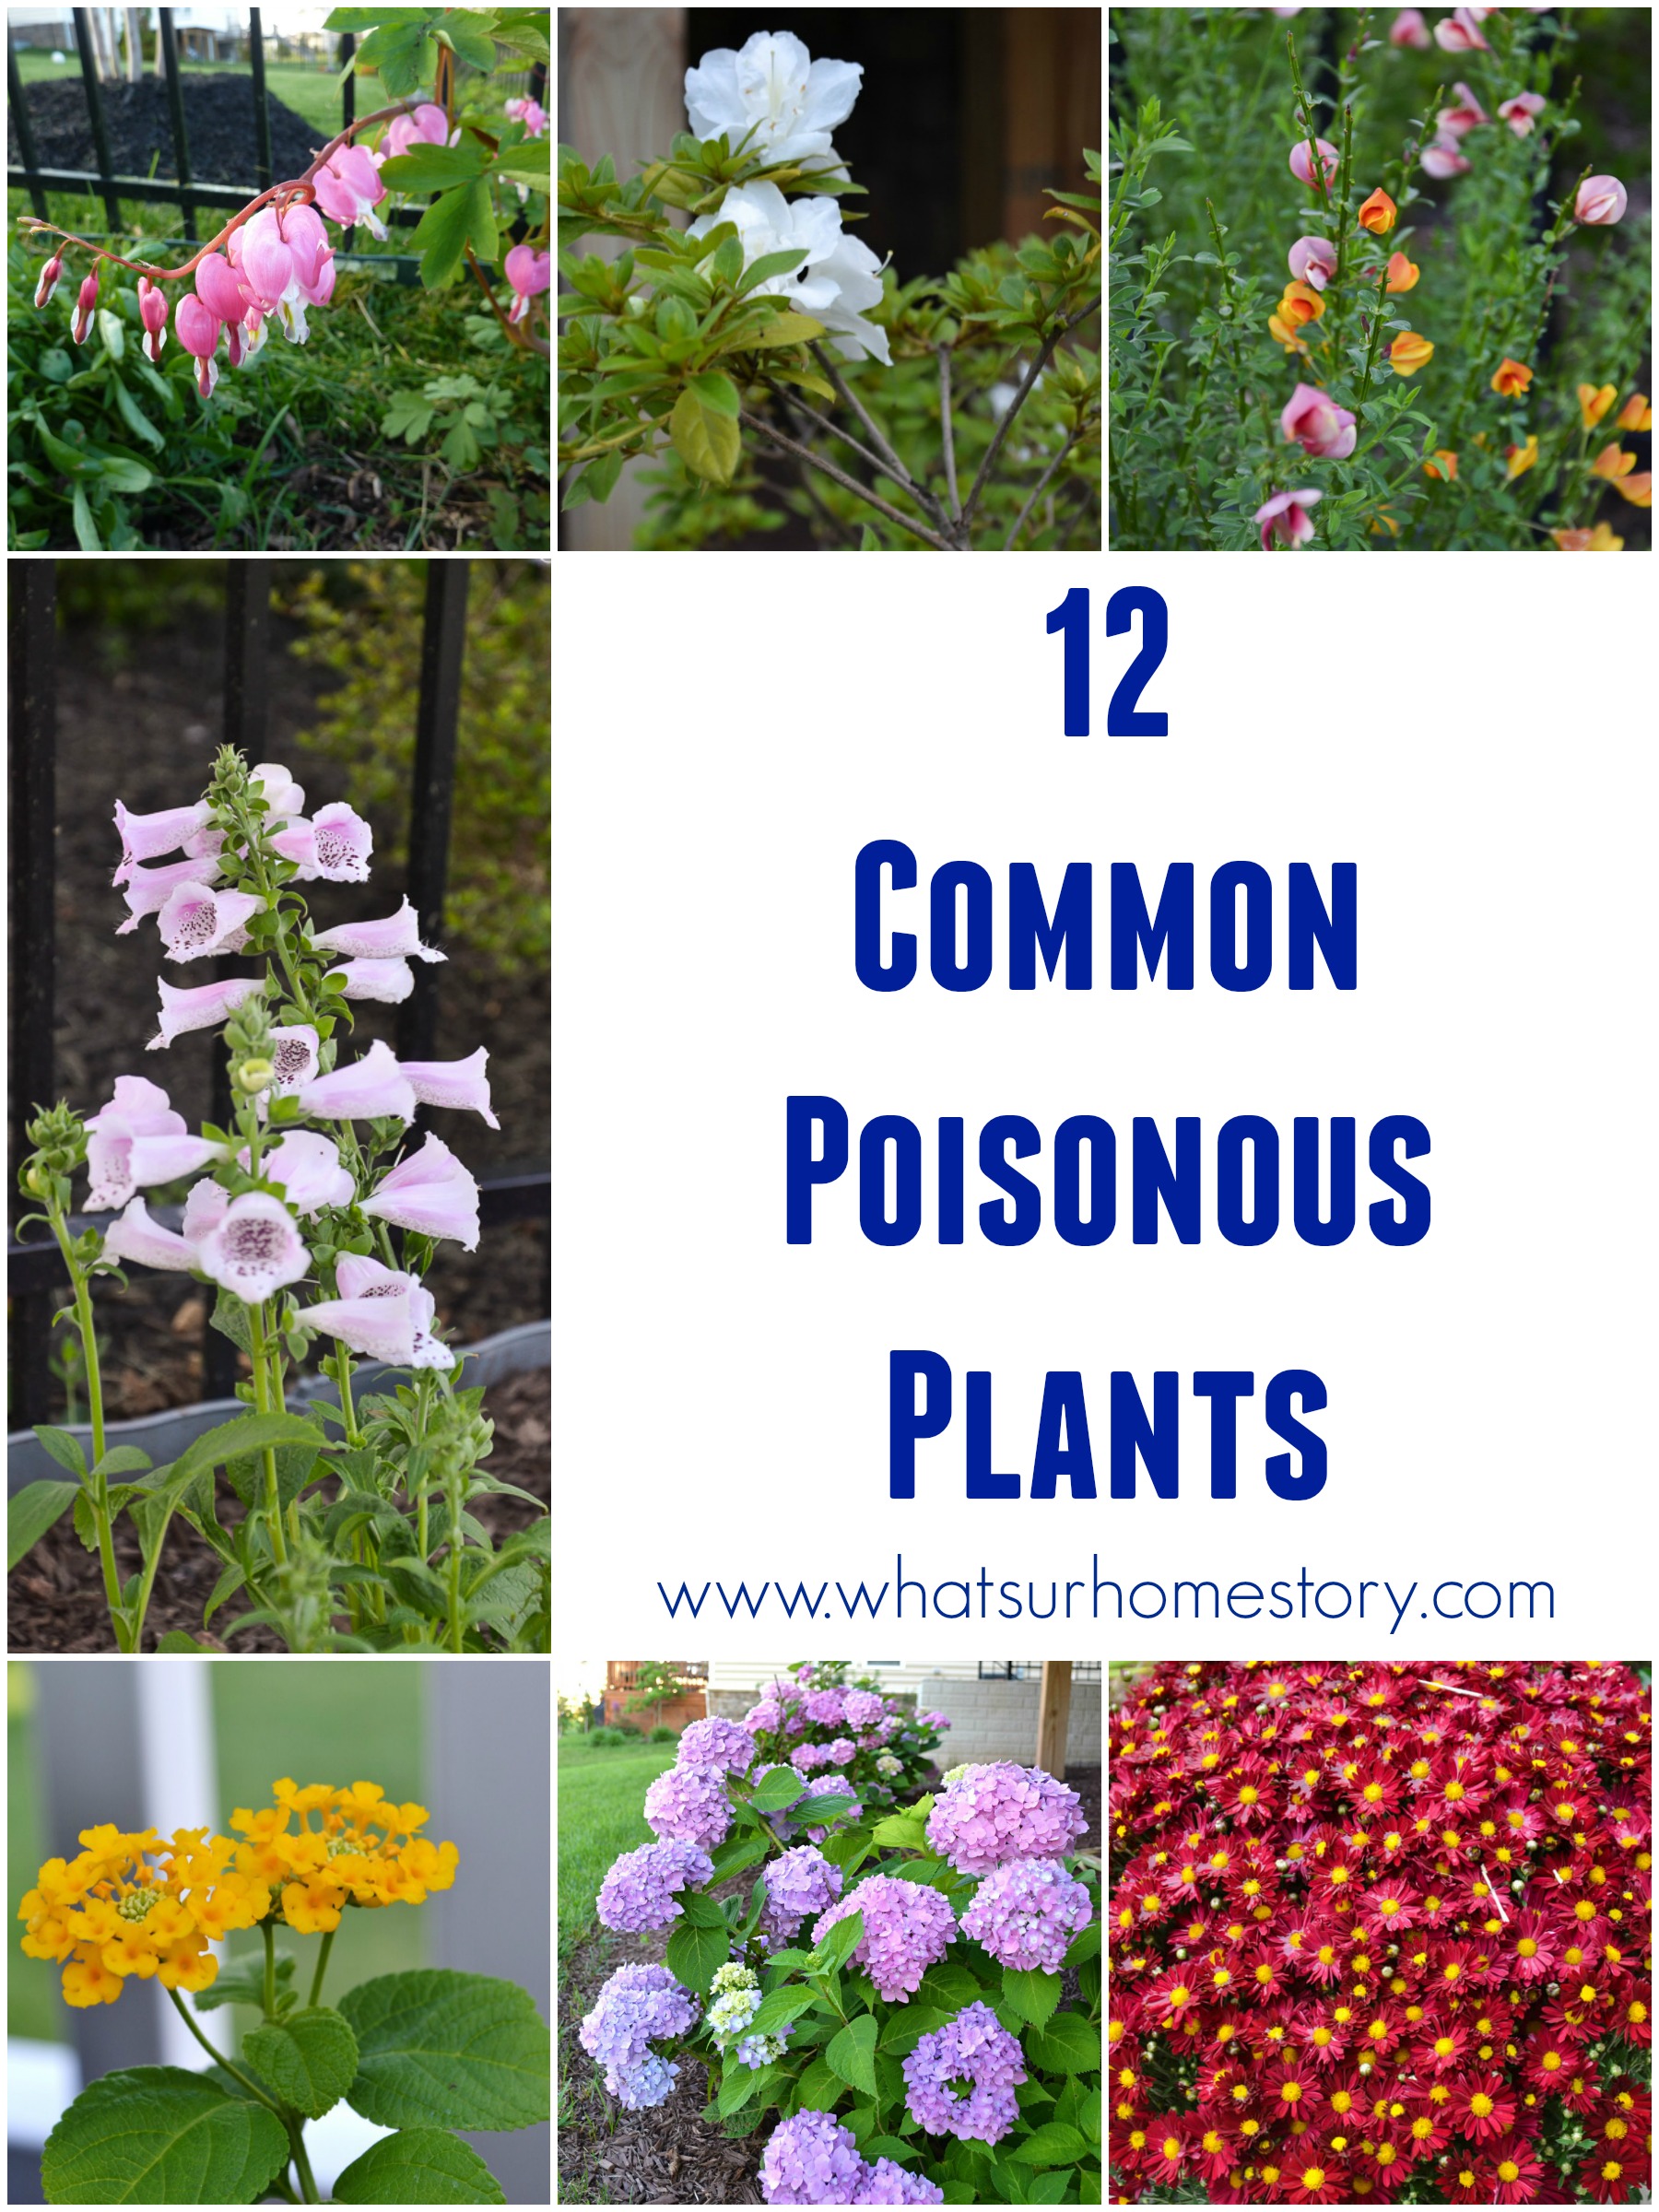 is digitalis poisonous to dogs